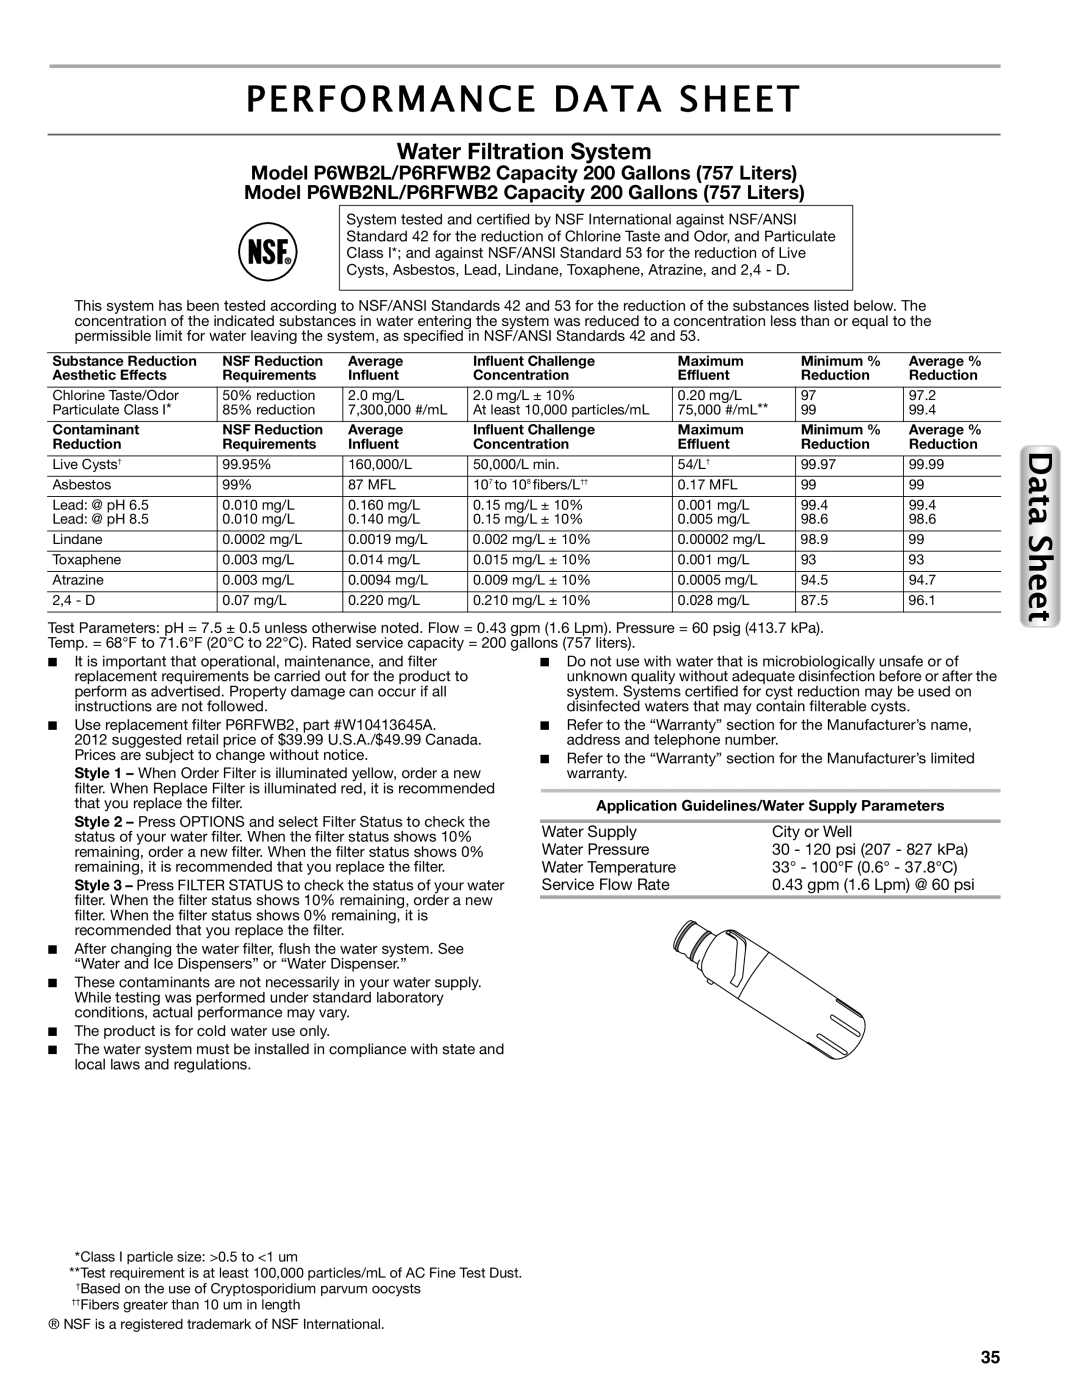 Maytag W10558104A Performance Data Sheet, Water Filtration System, Model P6WB2L/P6RFWB2 Capacity 200 Gallons 757 Liters 